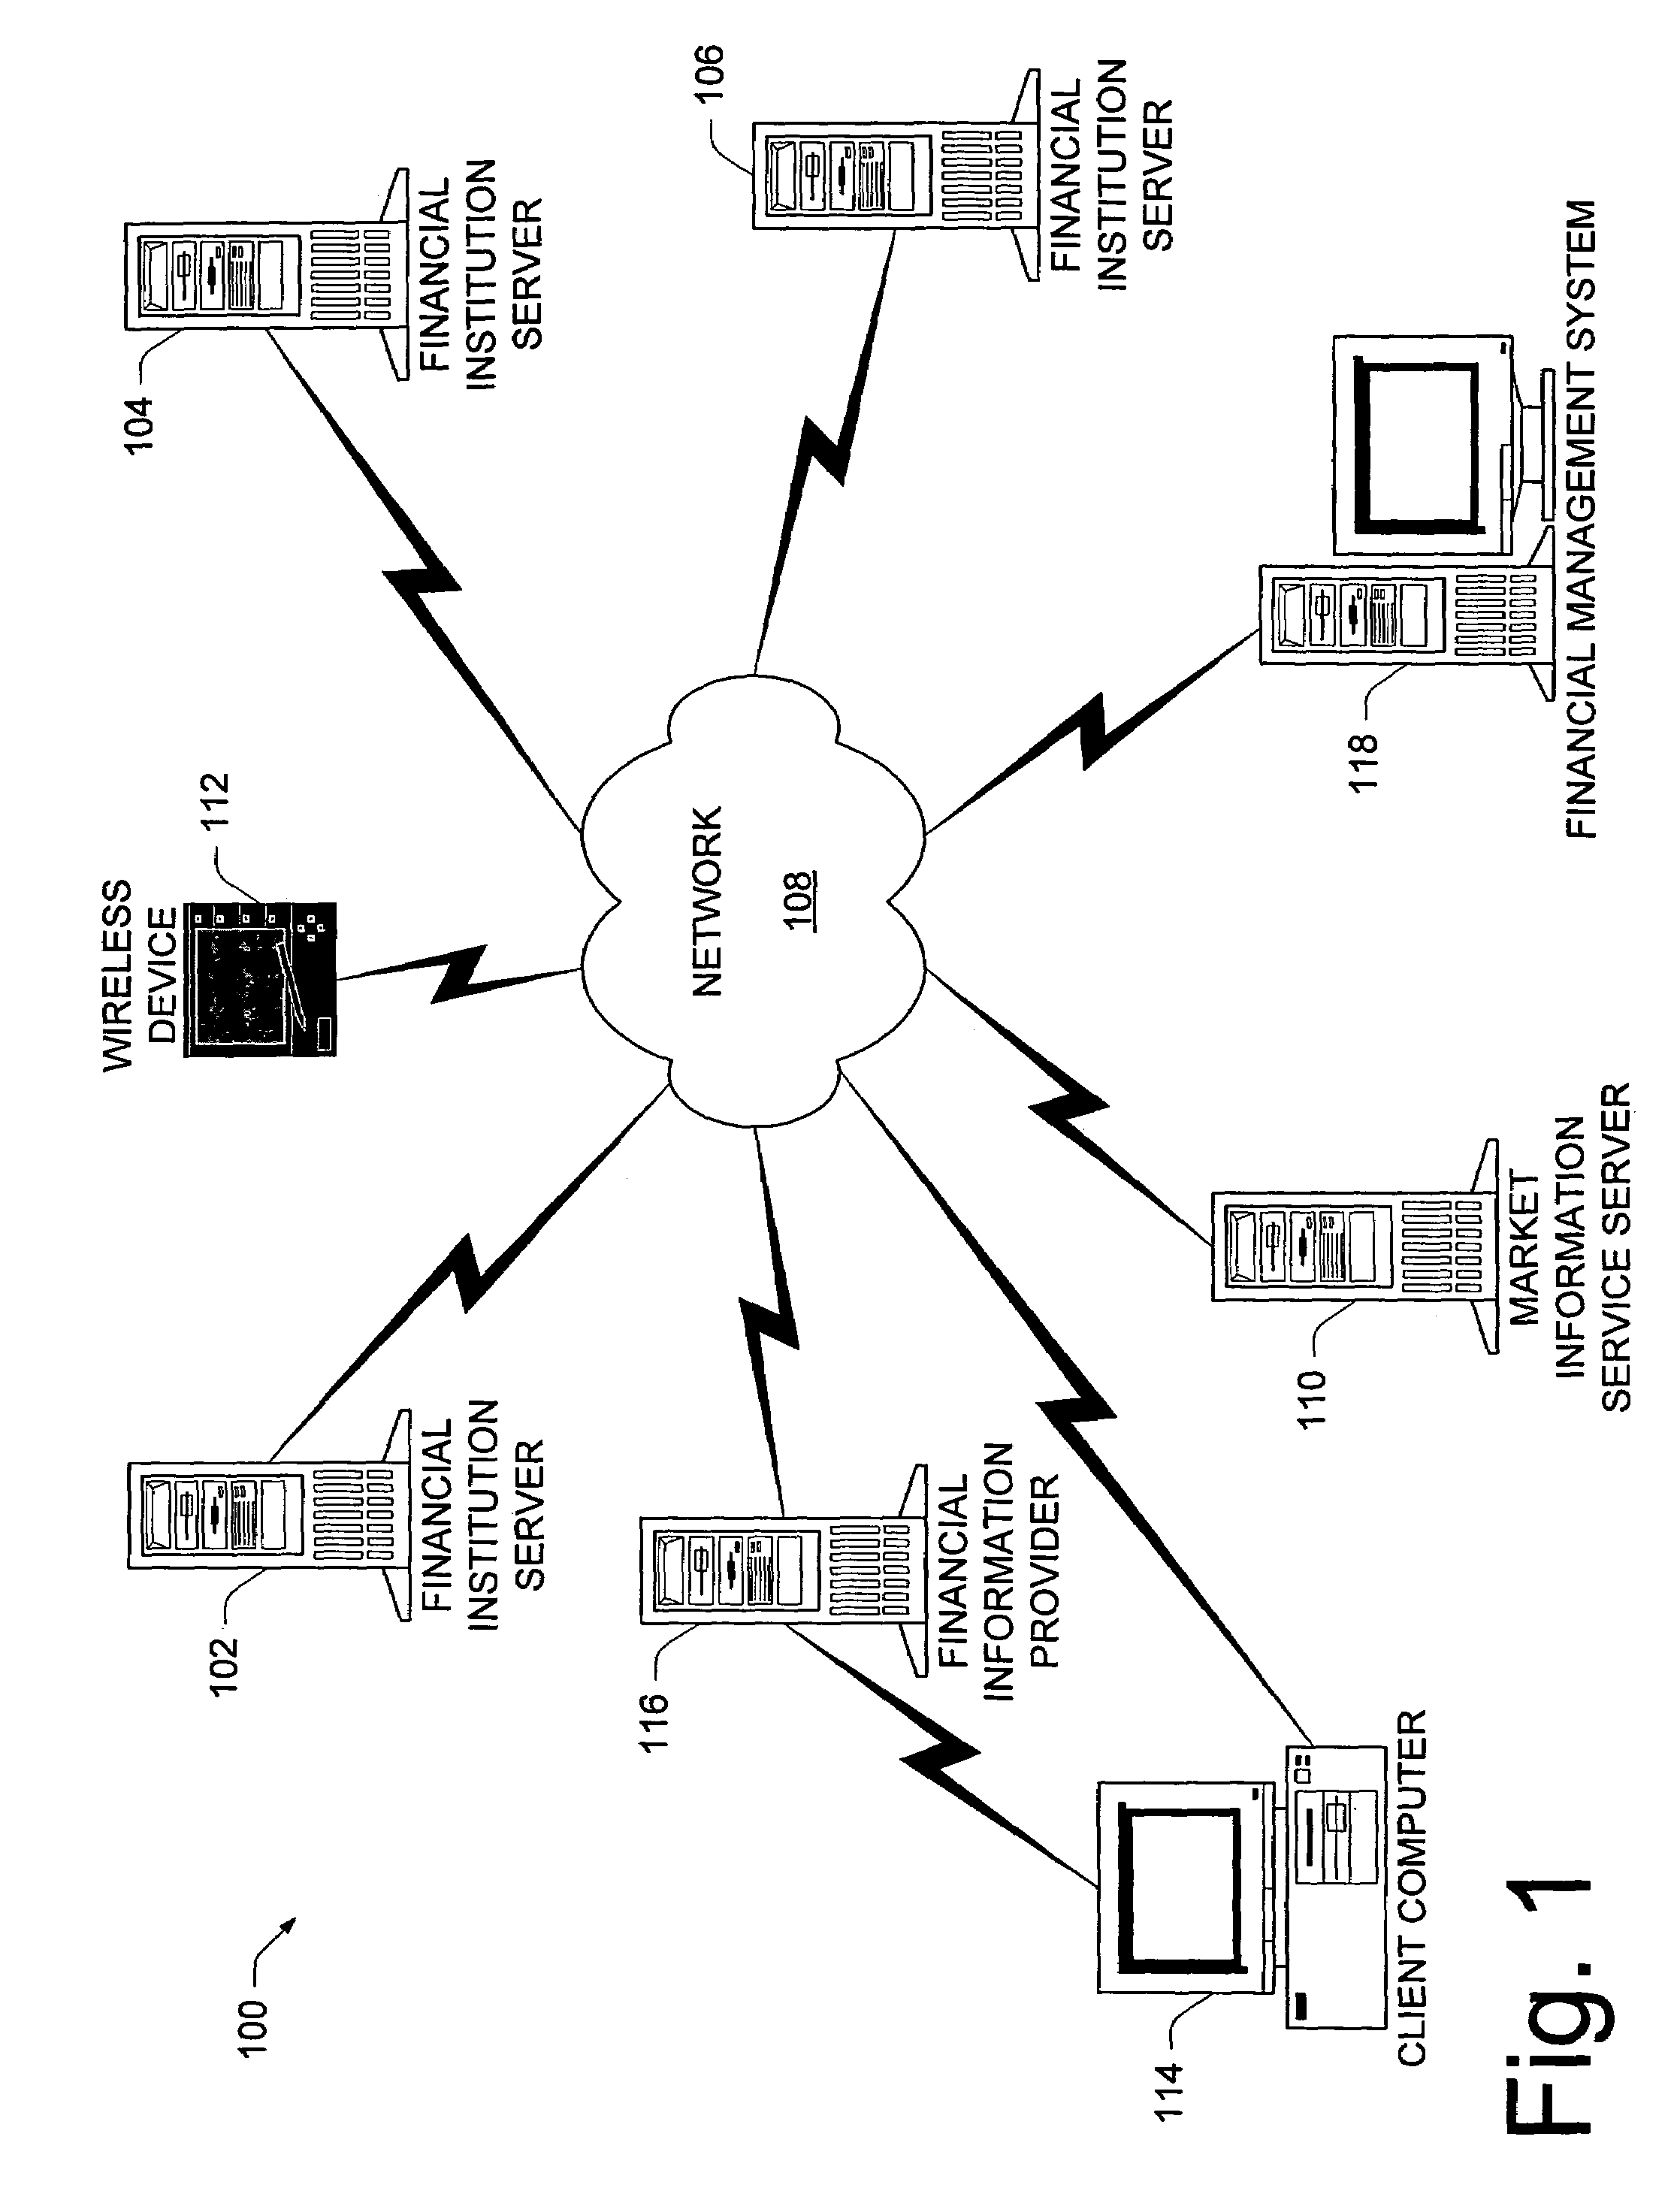 Method and apparatus for implementing financial transactions